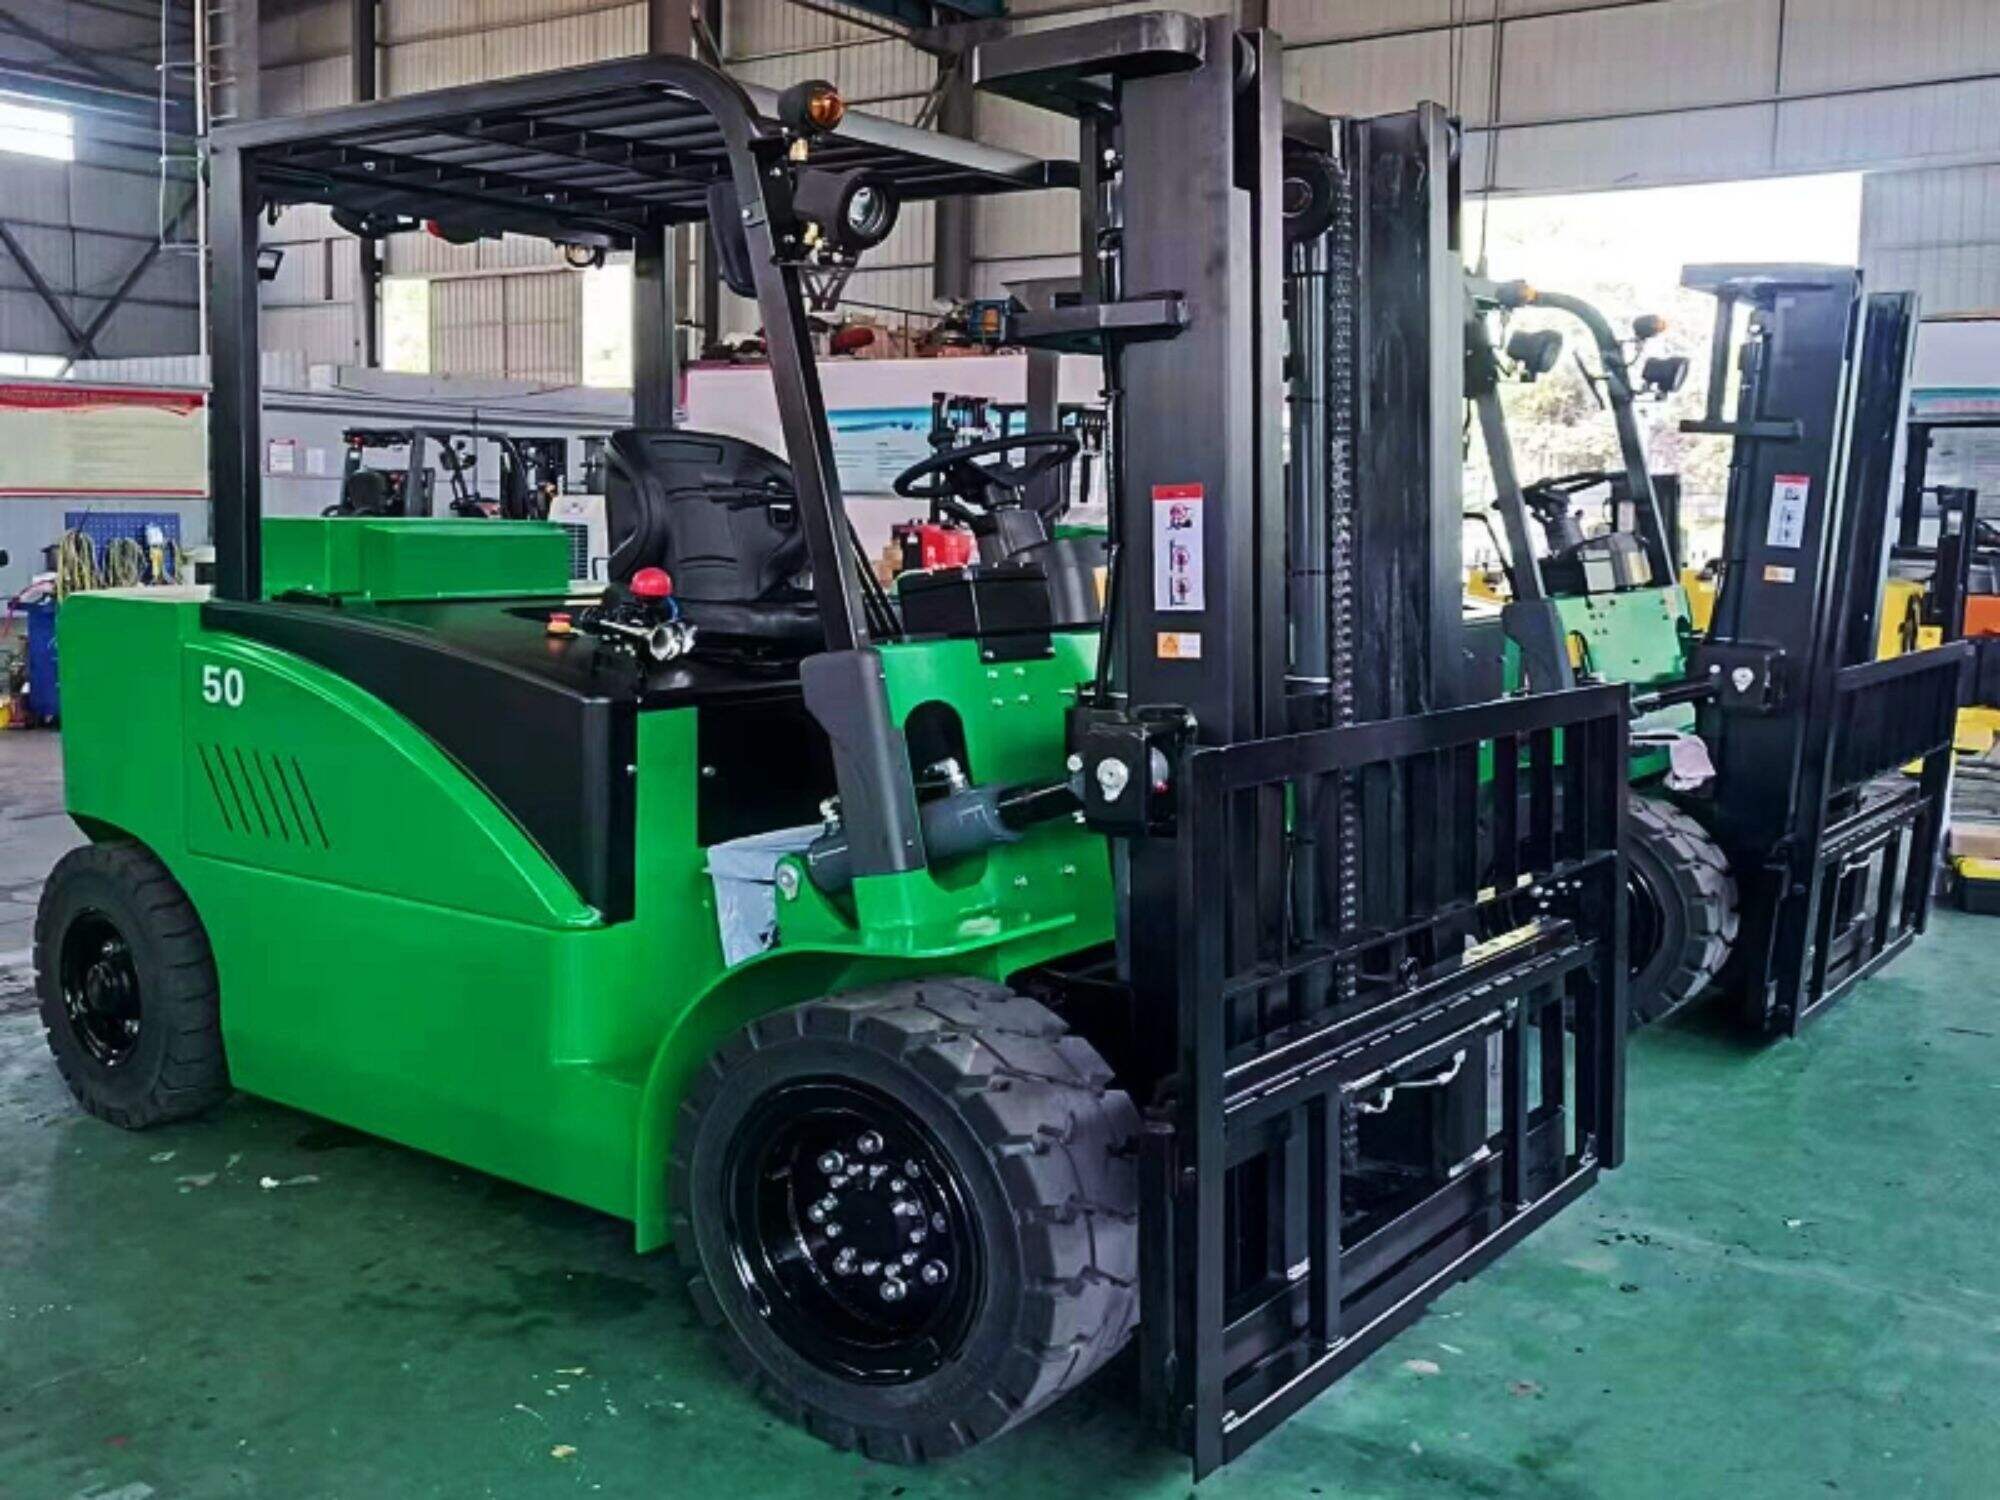 The advantages of electric forklifts